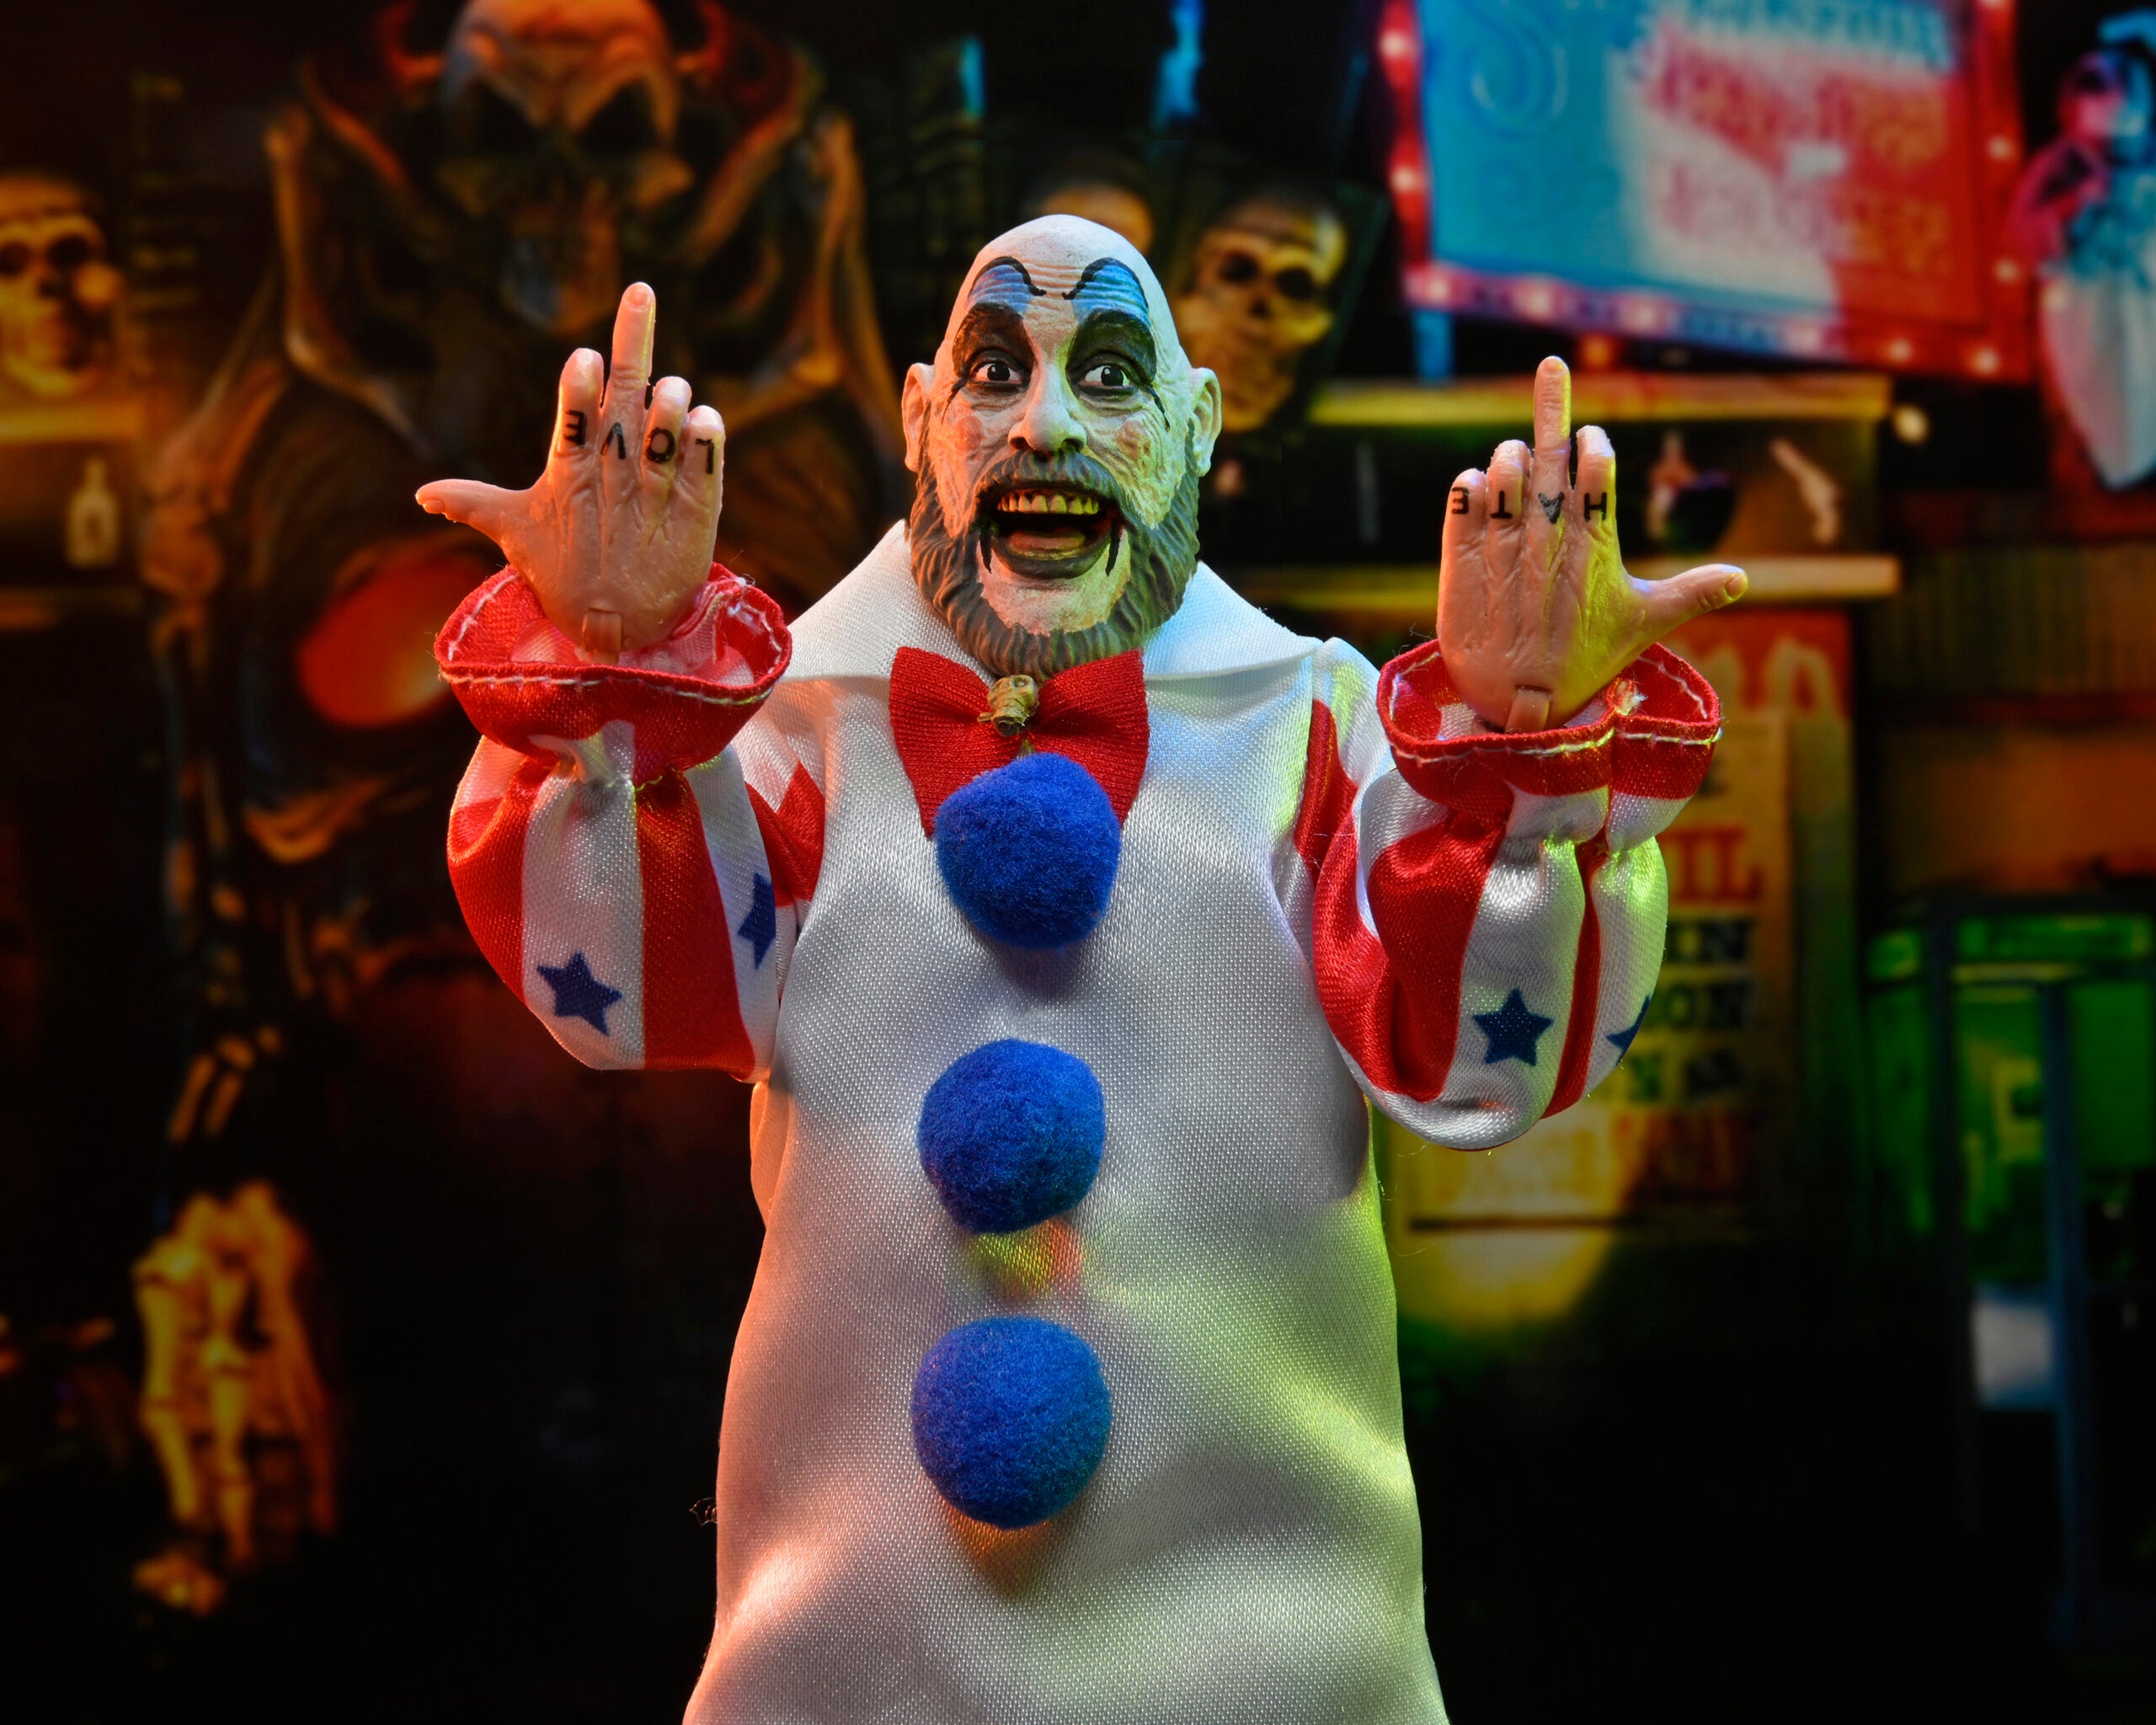 Neca - 8" Clothed Action Figure - House of 1000 Corpses - Captain Spaulding (20th Anniversary)